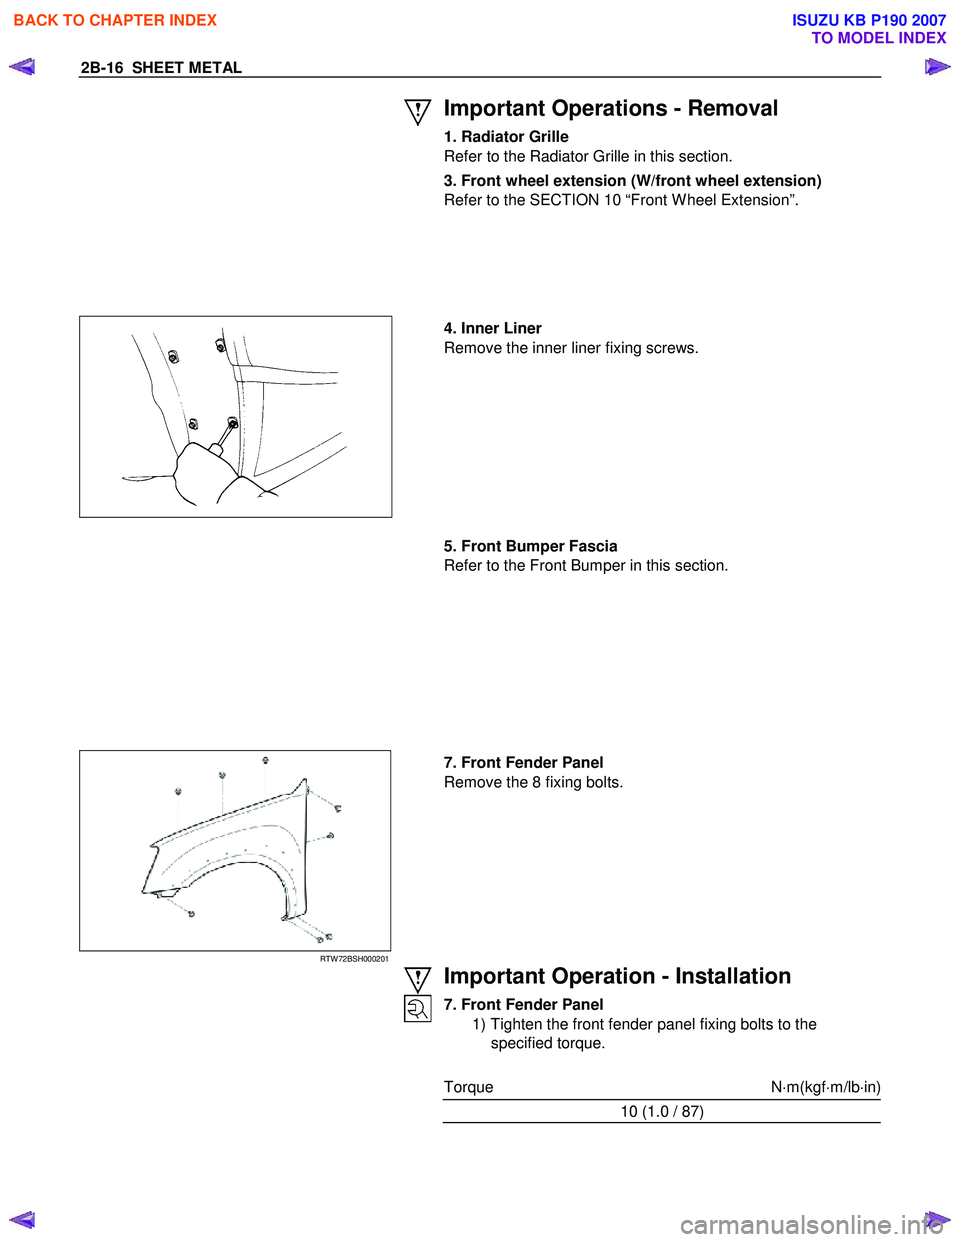 ISUZU KB P190 2007  Workshop Repair Manual 2B-16  SHEET METAL 
  
 
Important Operations - Removal 
1. Radiator Grille 
Refer to the Radiator Grille in this section.  
3. Front wheel extension (W/front wheel extension)  
Refer to the SECTION 1